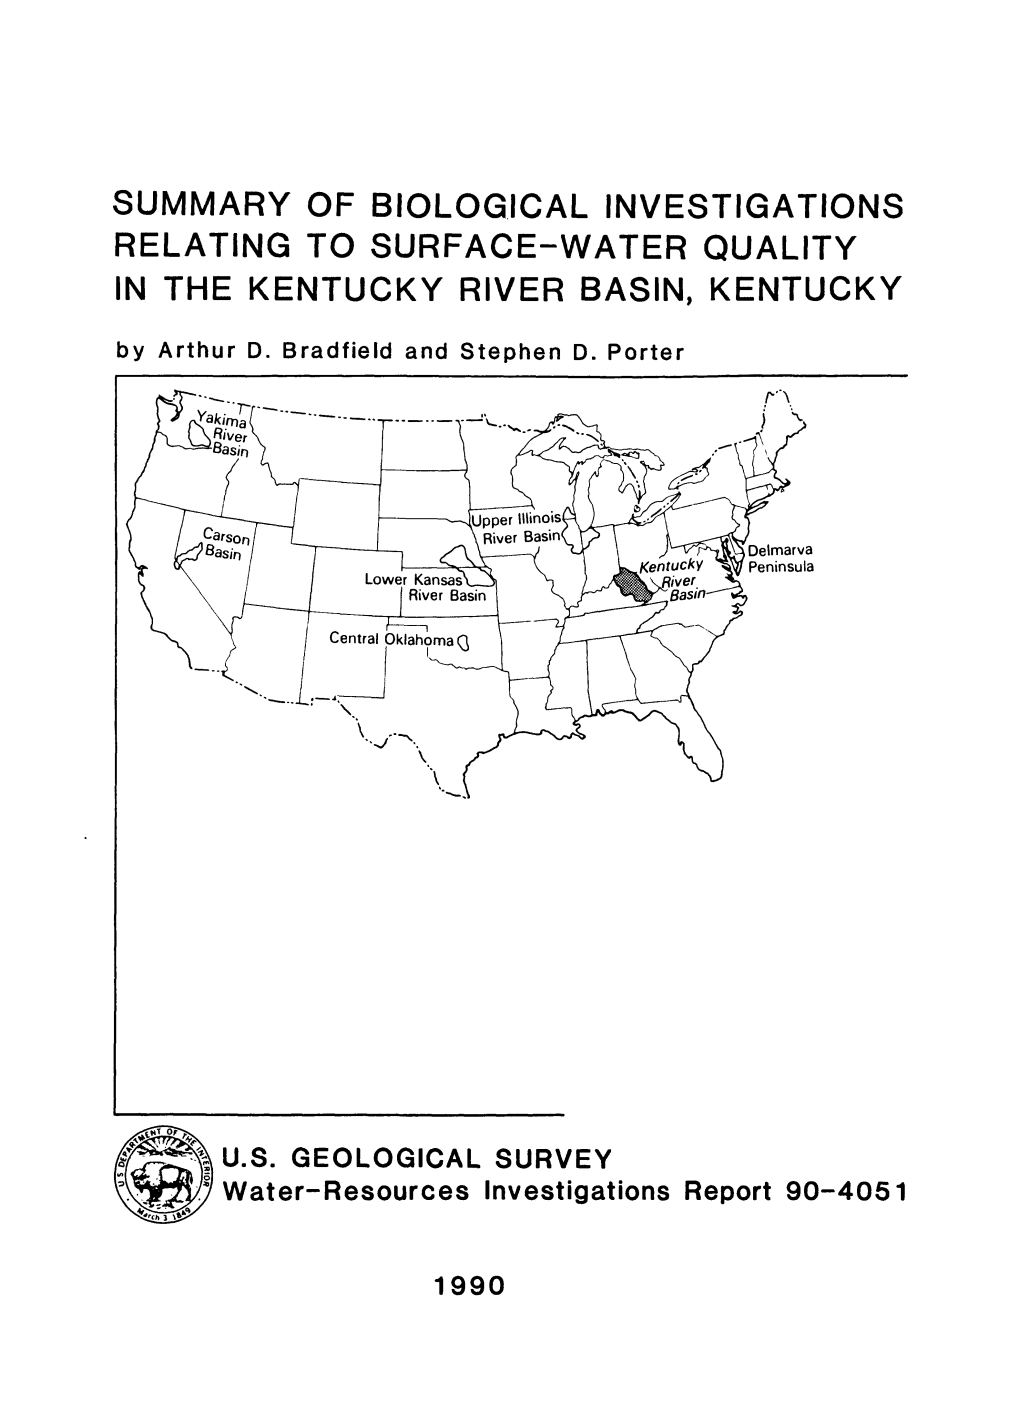 SUMMARY of BIOLOGICAL INVESTIGATIONS RELATING to SURFACE-WATER QUALITY in the KENTUCKY RIVER BASIN, KENTUCKY by Arthur D